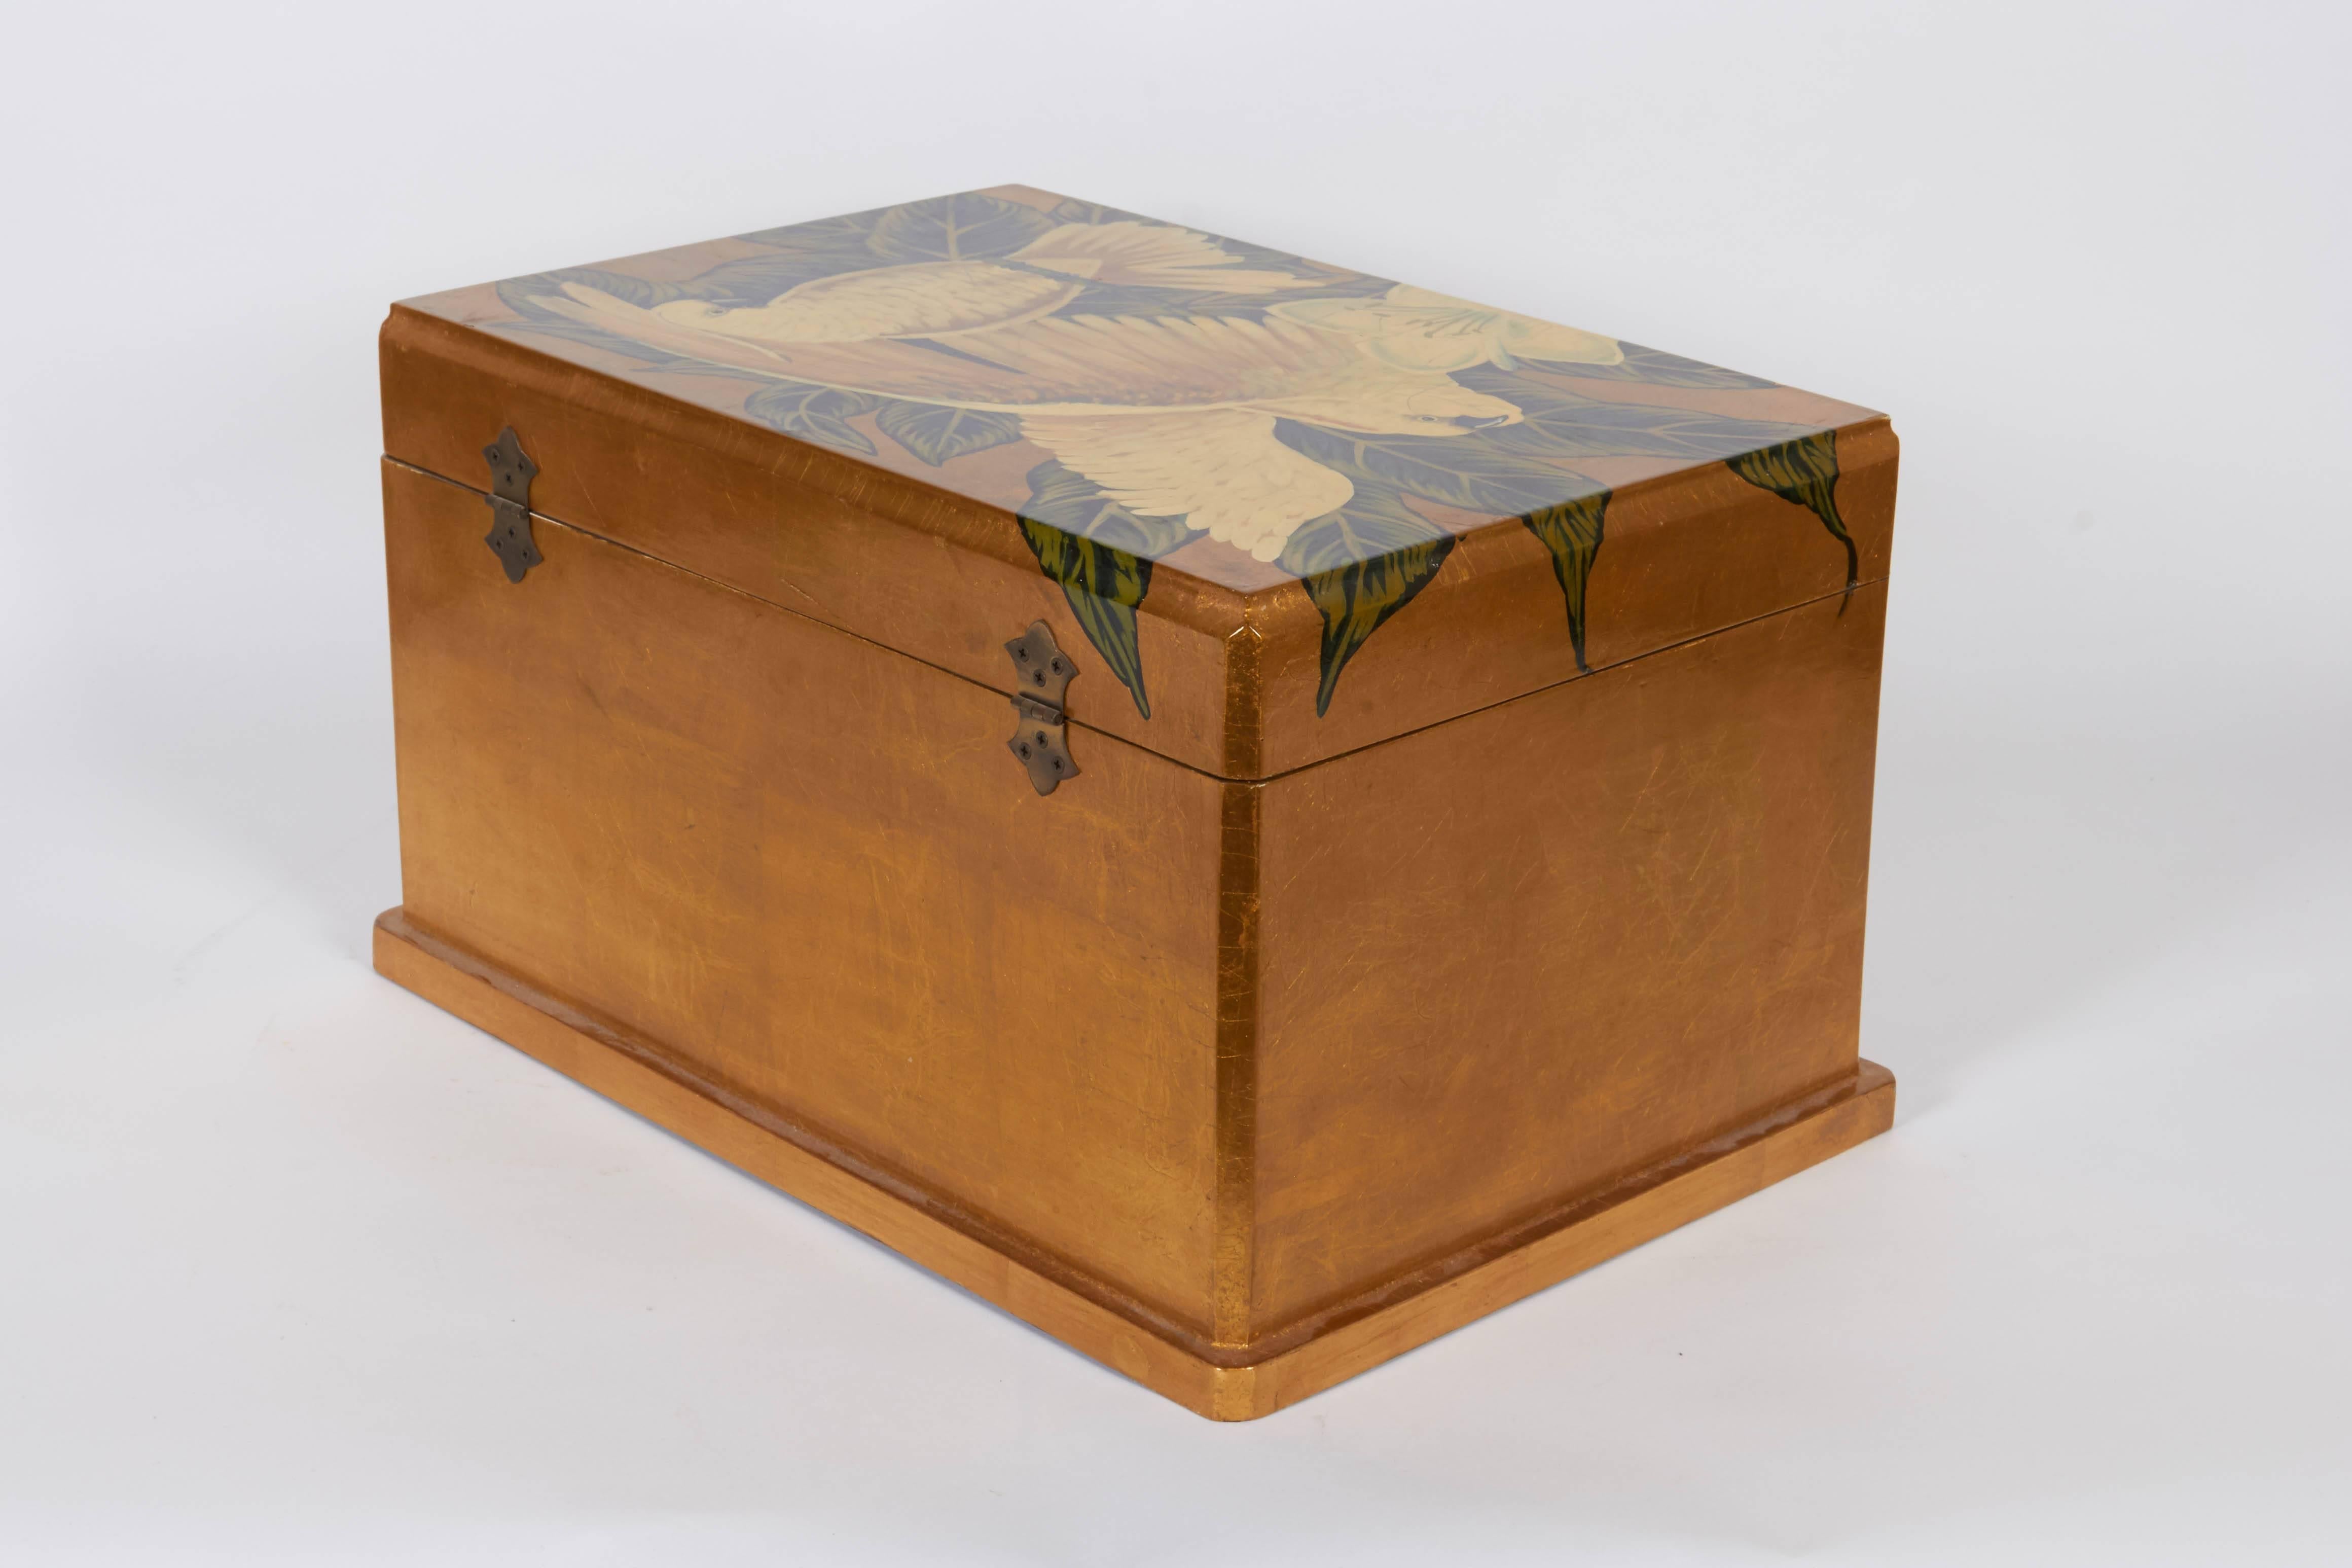 Hand-Painted Gold Leaf Jewelry Box with Cockatoos 3